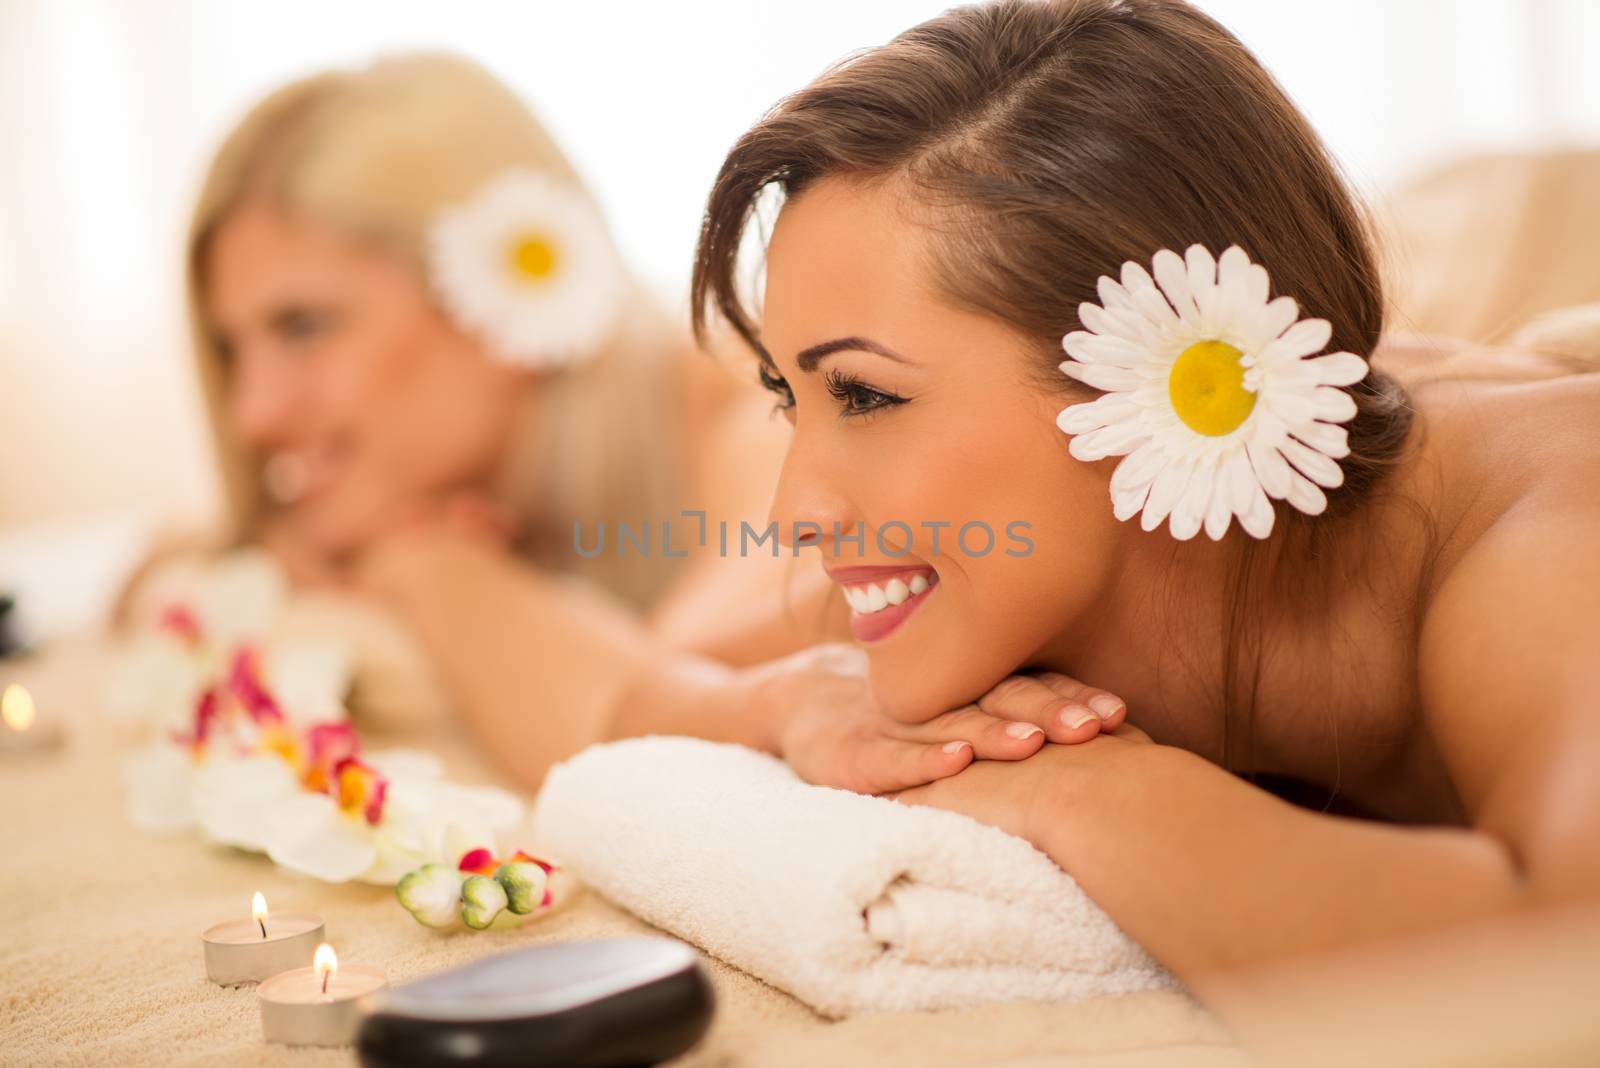 Cute young woman enjoying during a skin care treatment at a spa. Selective focus. Focus on foreground. In background her female friend relaxing.